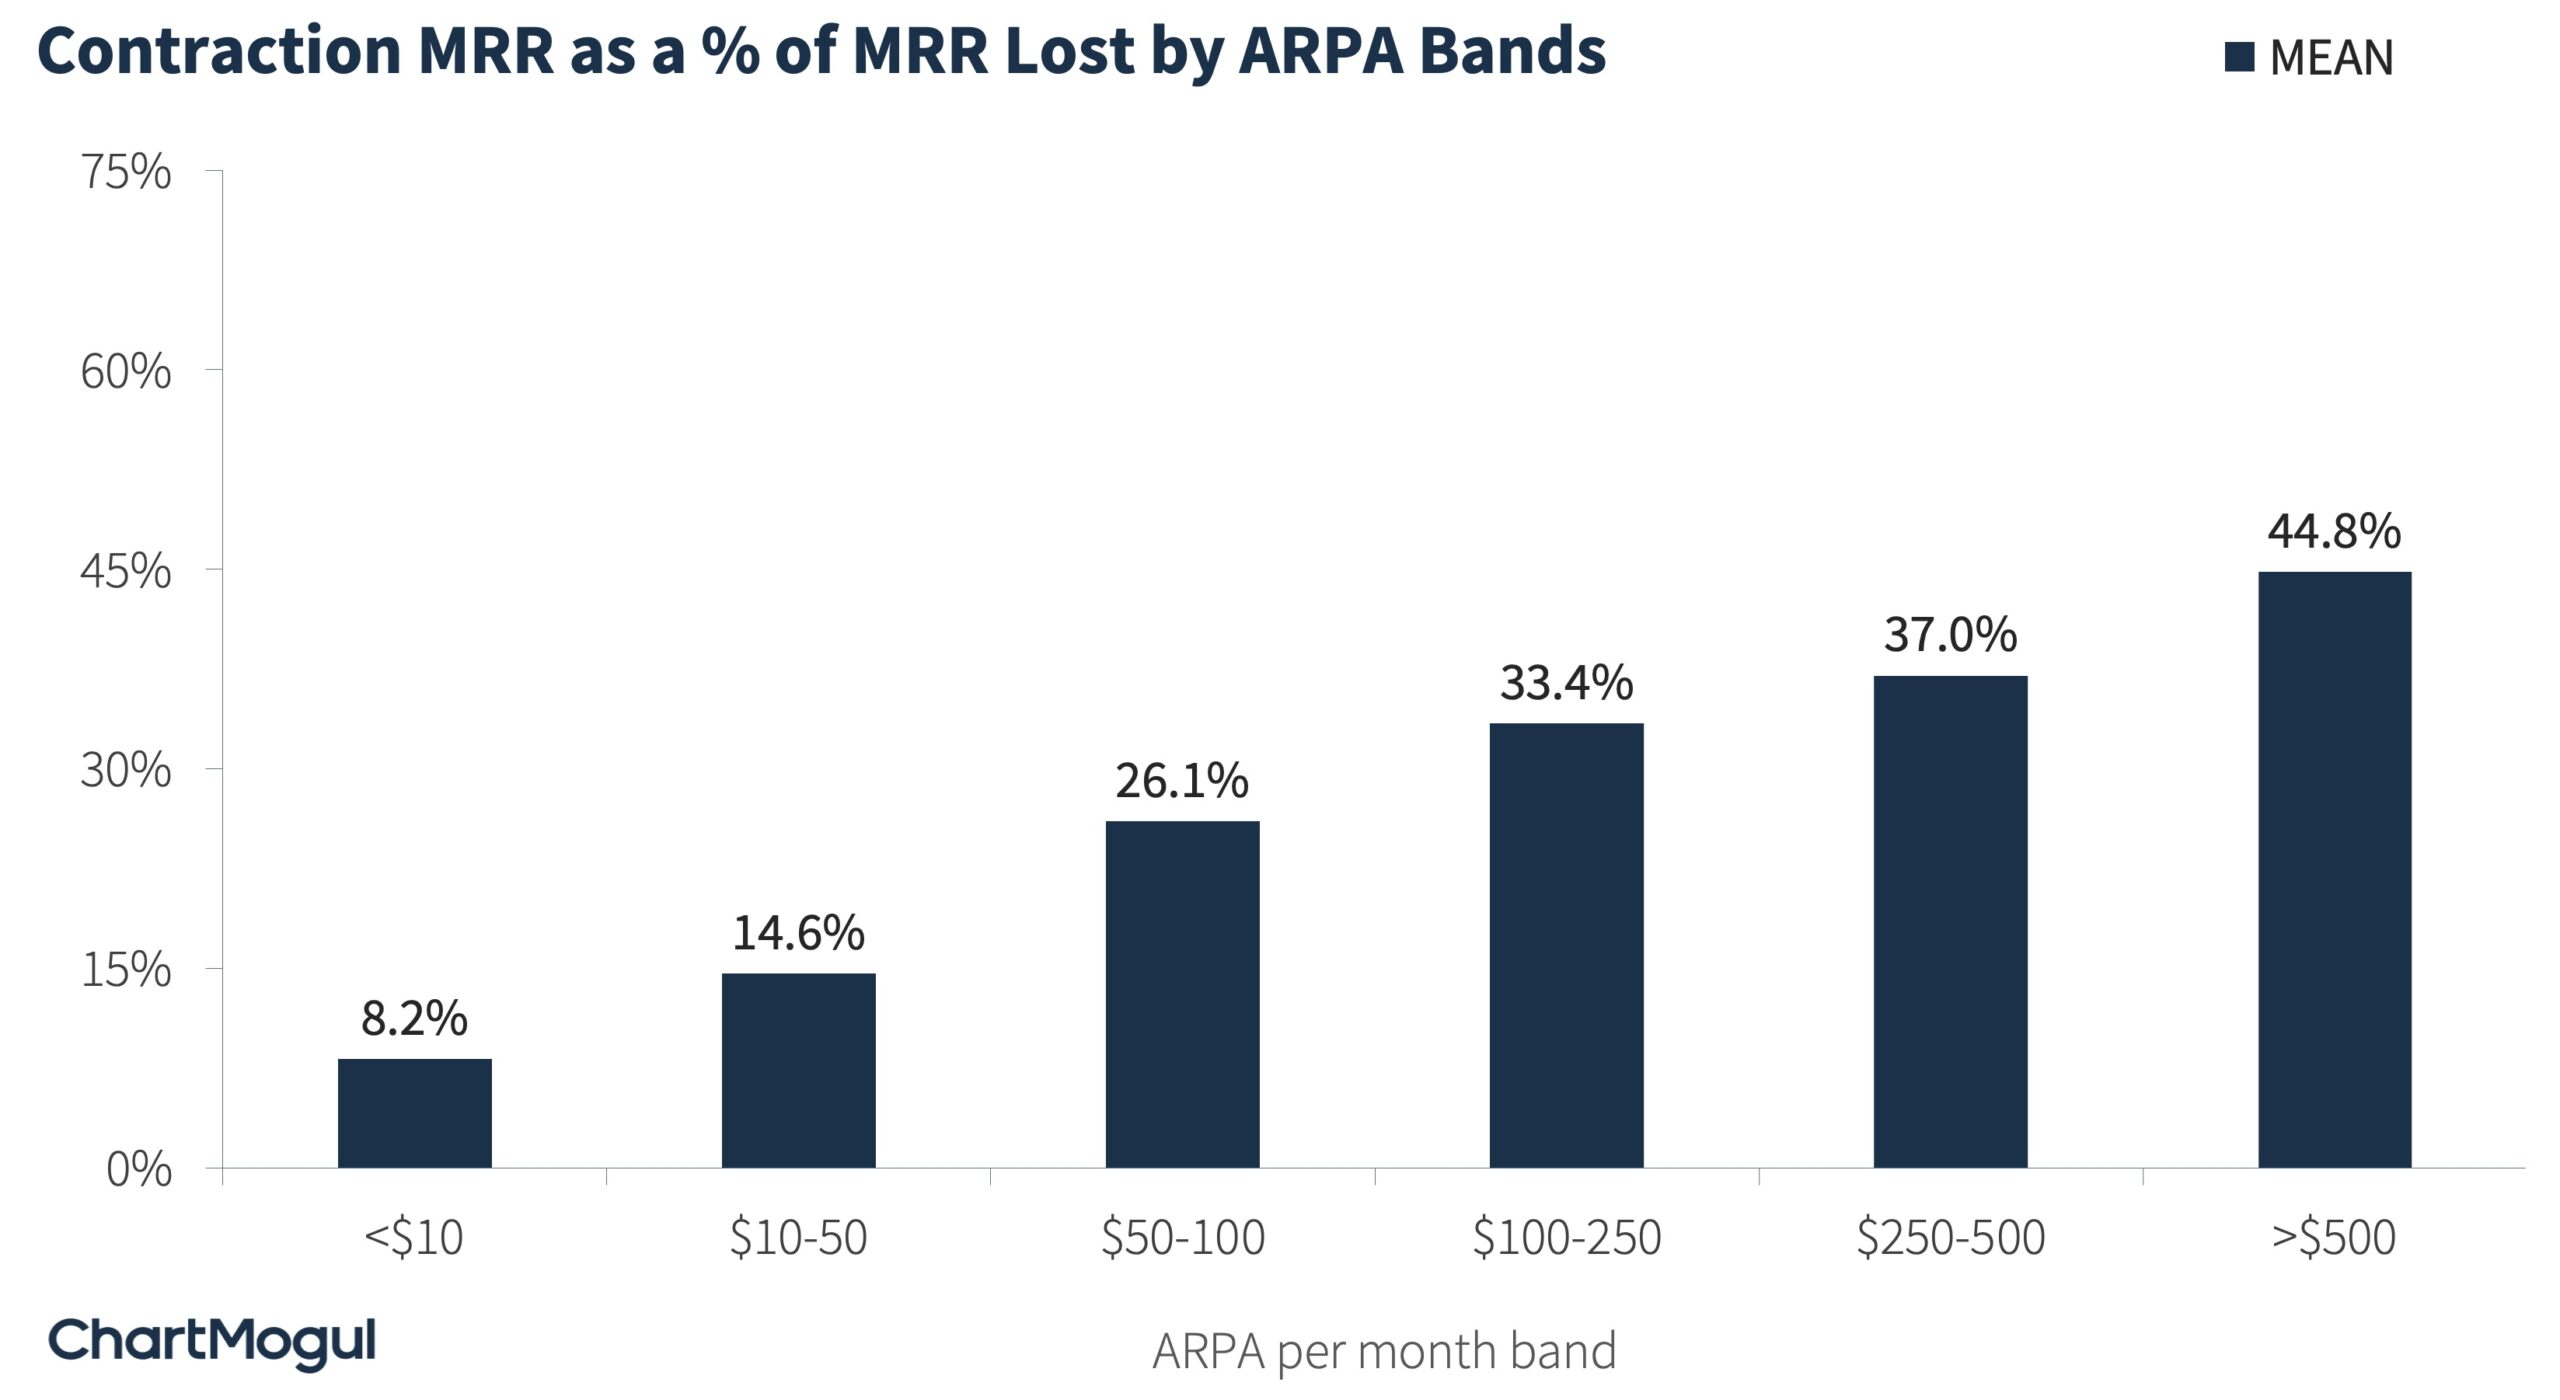 Contaction MRR as a % of MRR Lost by ARPA Bands